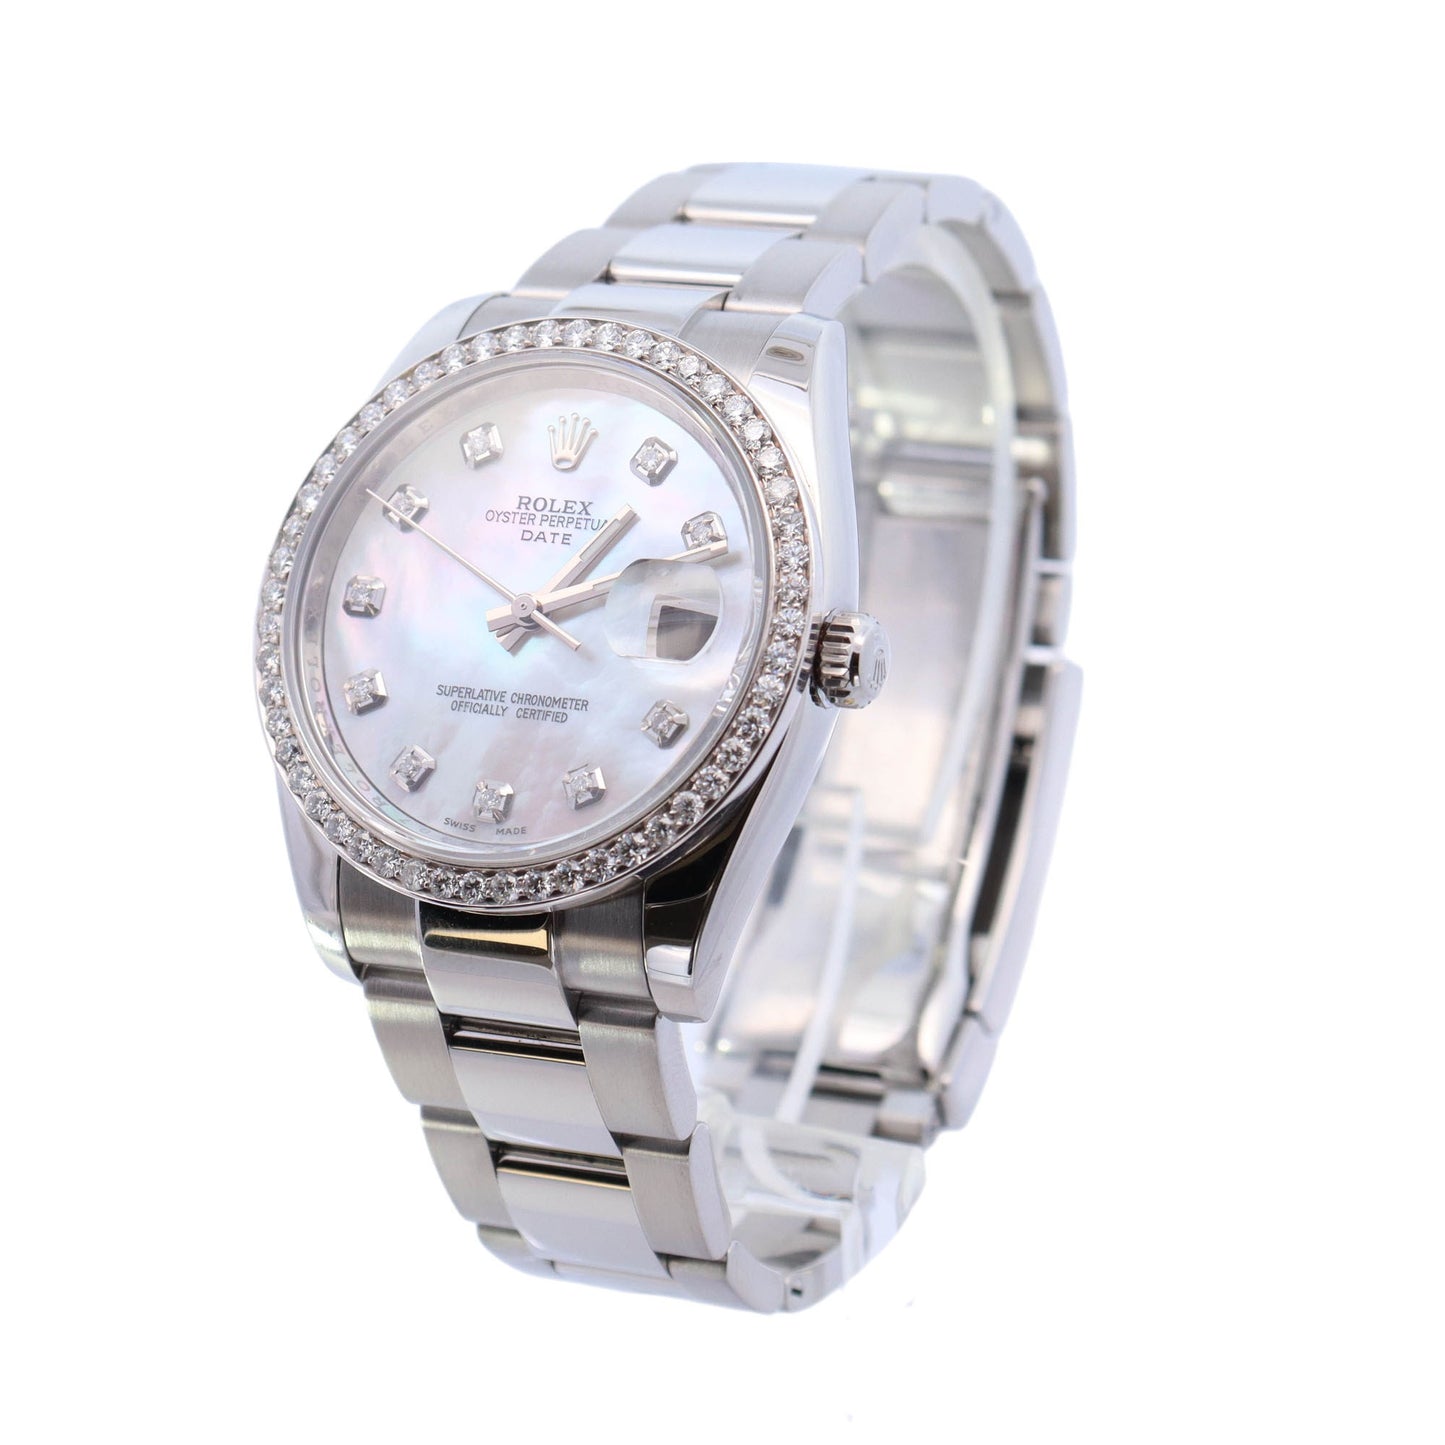 Rolex Oyster Perpetual Date 34mm Stainless Steel Custom White MOP Diamond Dial Watch  Reference #: 115200 - Happy Jewelers Fine Jewelry Lifetime Warranty